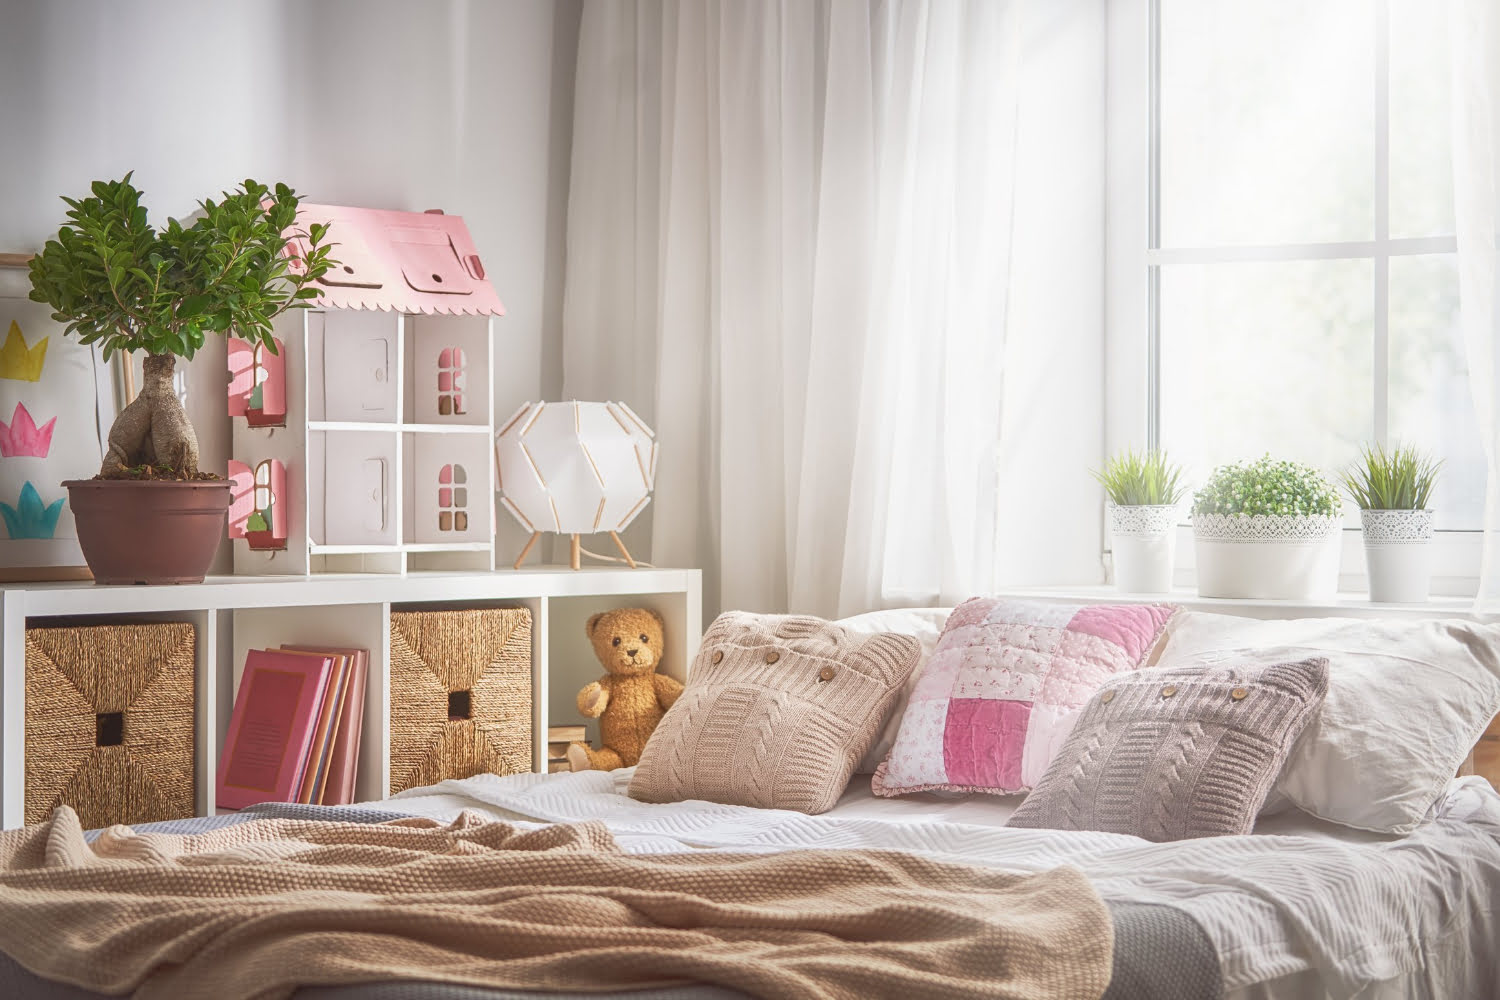 5 Must-Haves For Every Small Kid’s Room From Professional Organizers